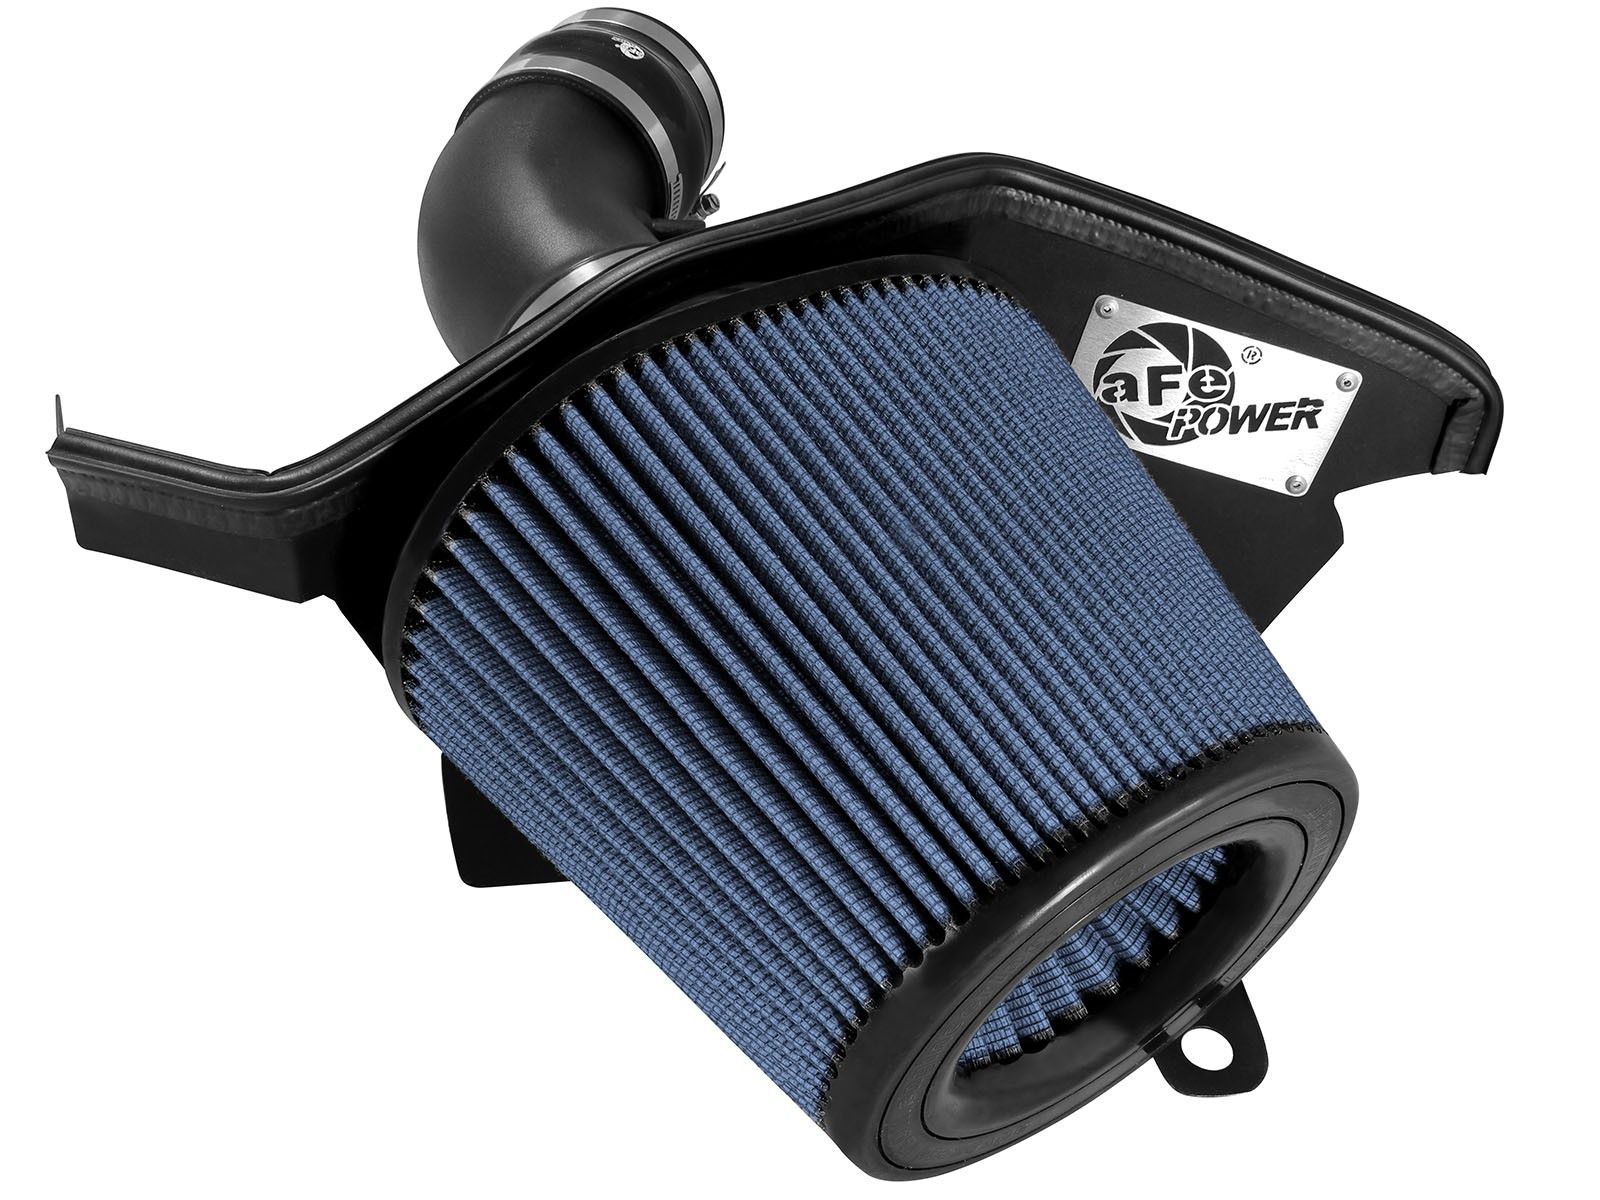 2012-2019 Jeep Grand Cherokee SRT HEMI V8 6.4L Magnum FORCE Stage-2 Cold Air Intake System w/Pro 2012 Jeep Grand Cherokee Engine Air Filter